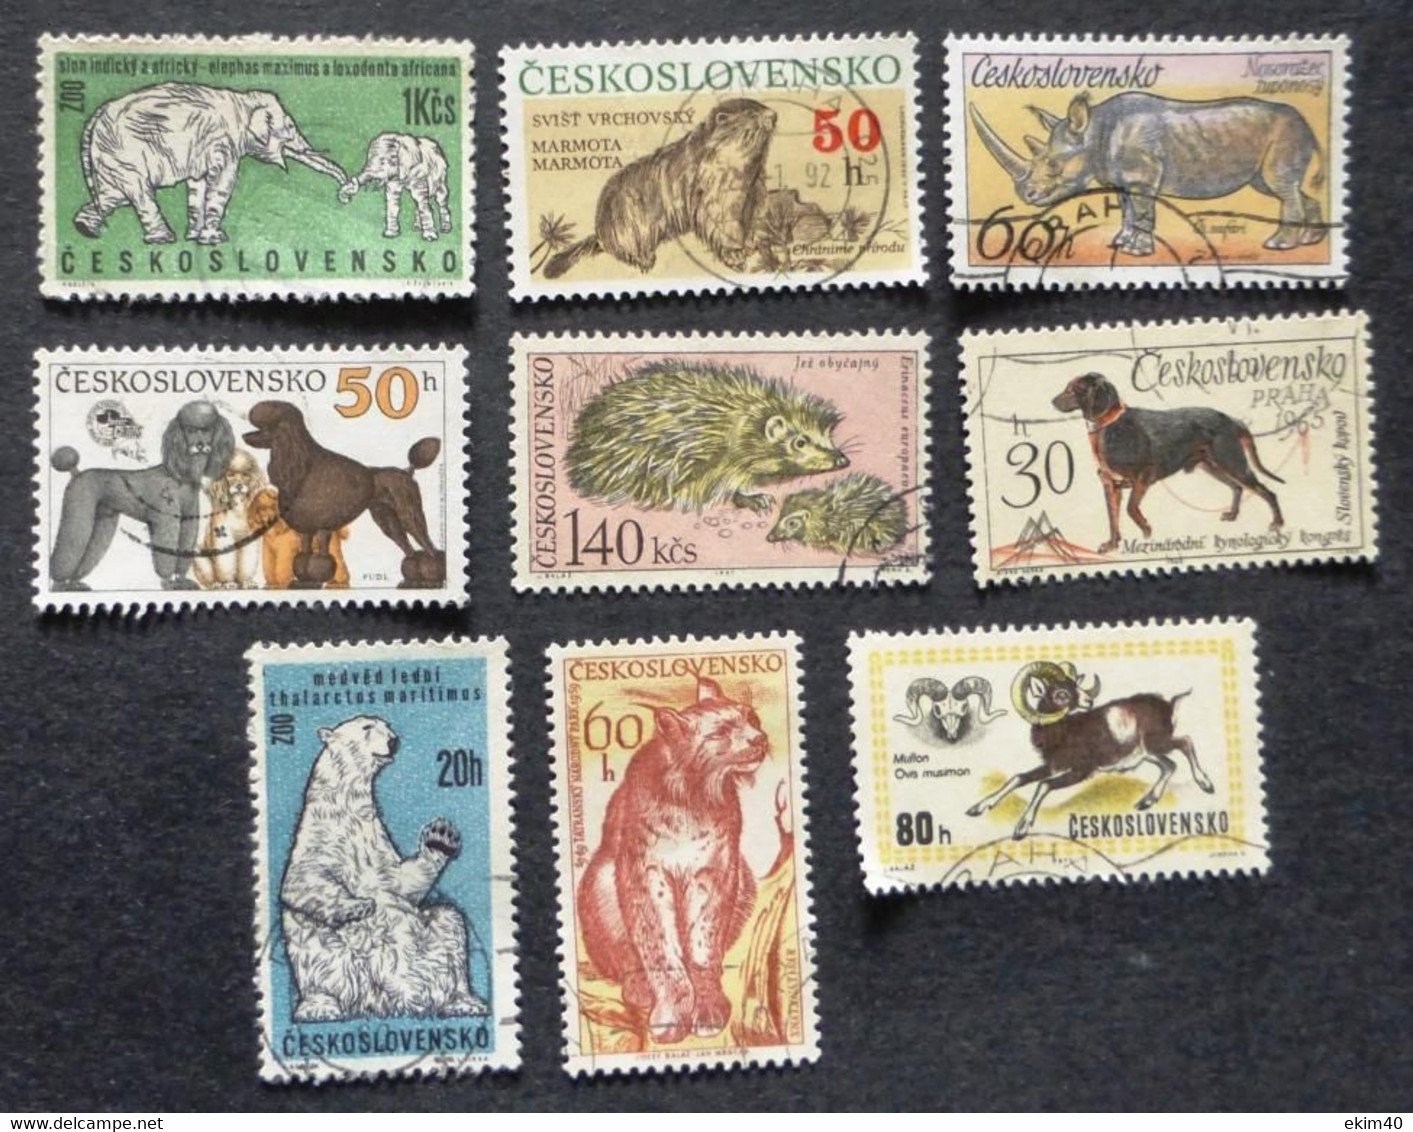 Selection Of Used/Cancelled Stamps From Czechoslovakia Wild & Domestic Animals. No DC-453 - Used Stamps